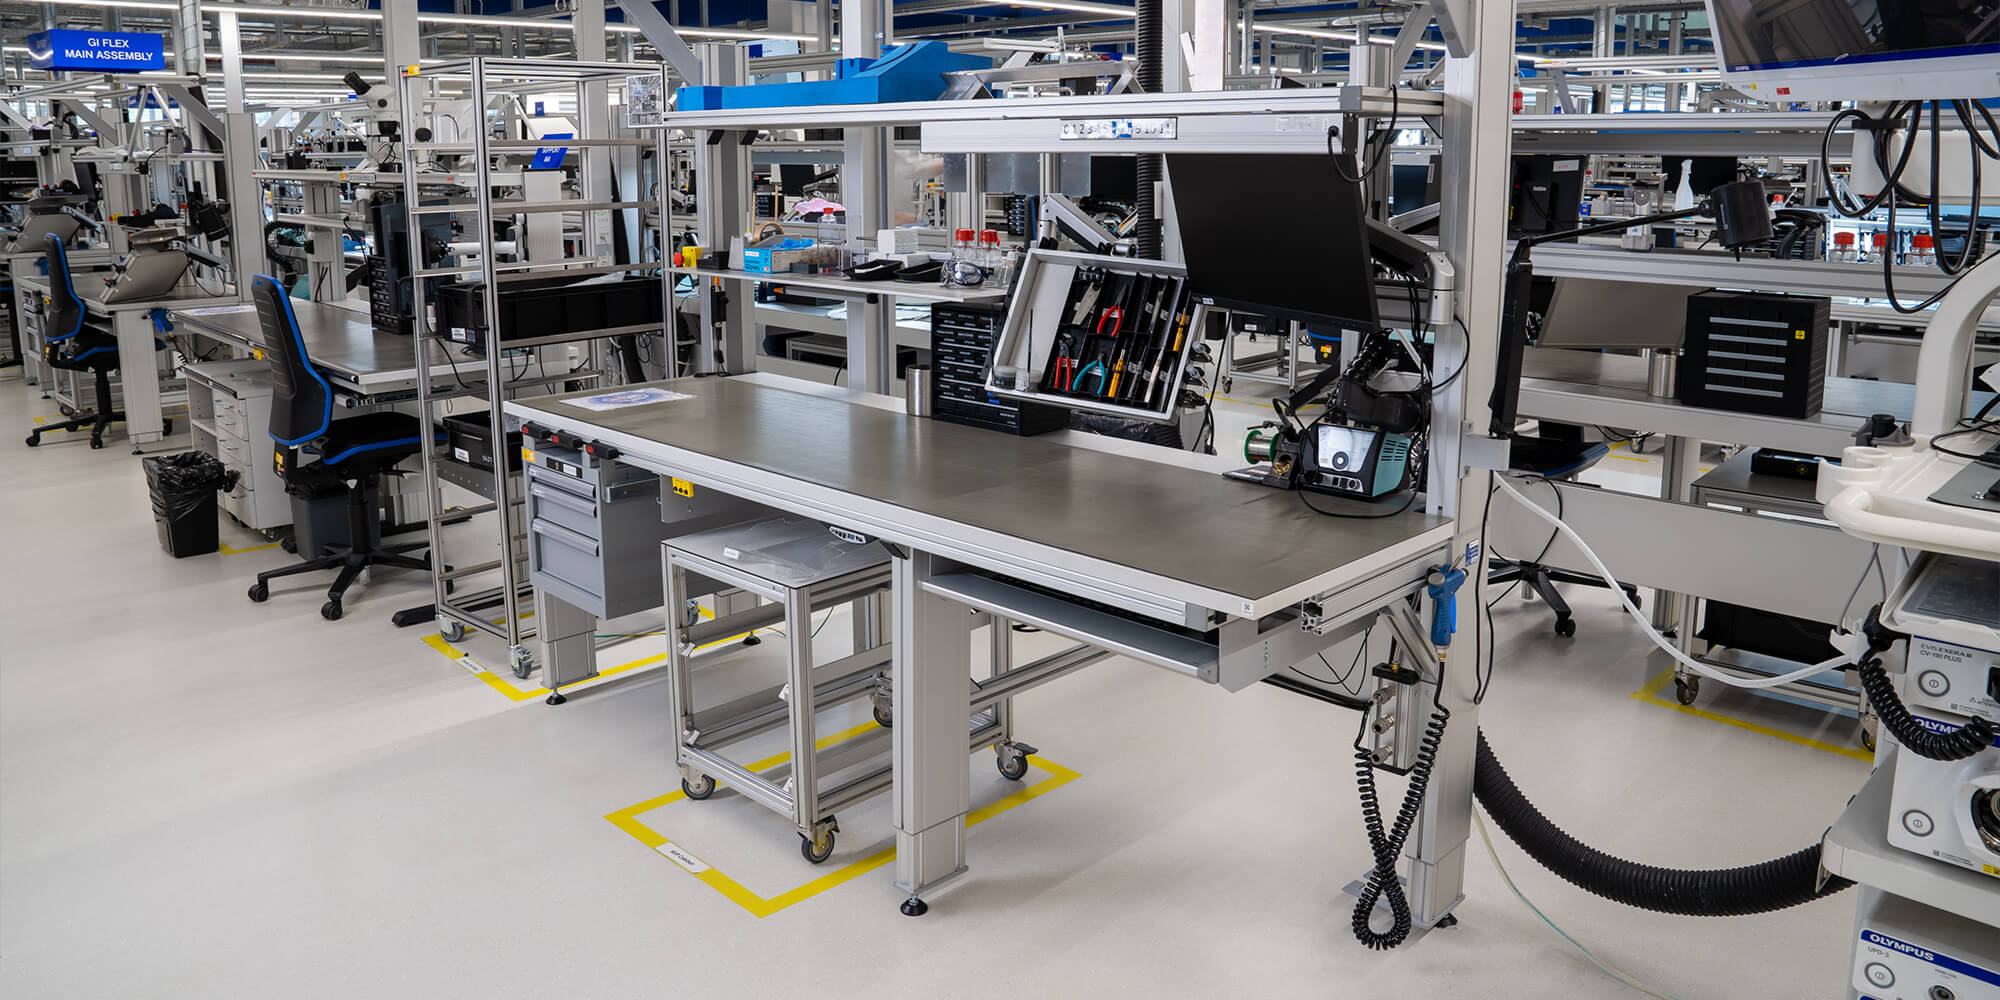 Ergonomic work bench design in the medical technology sector